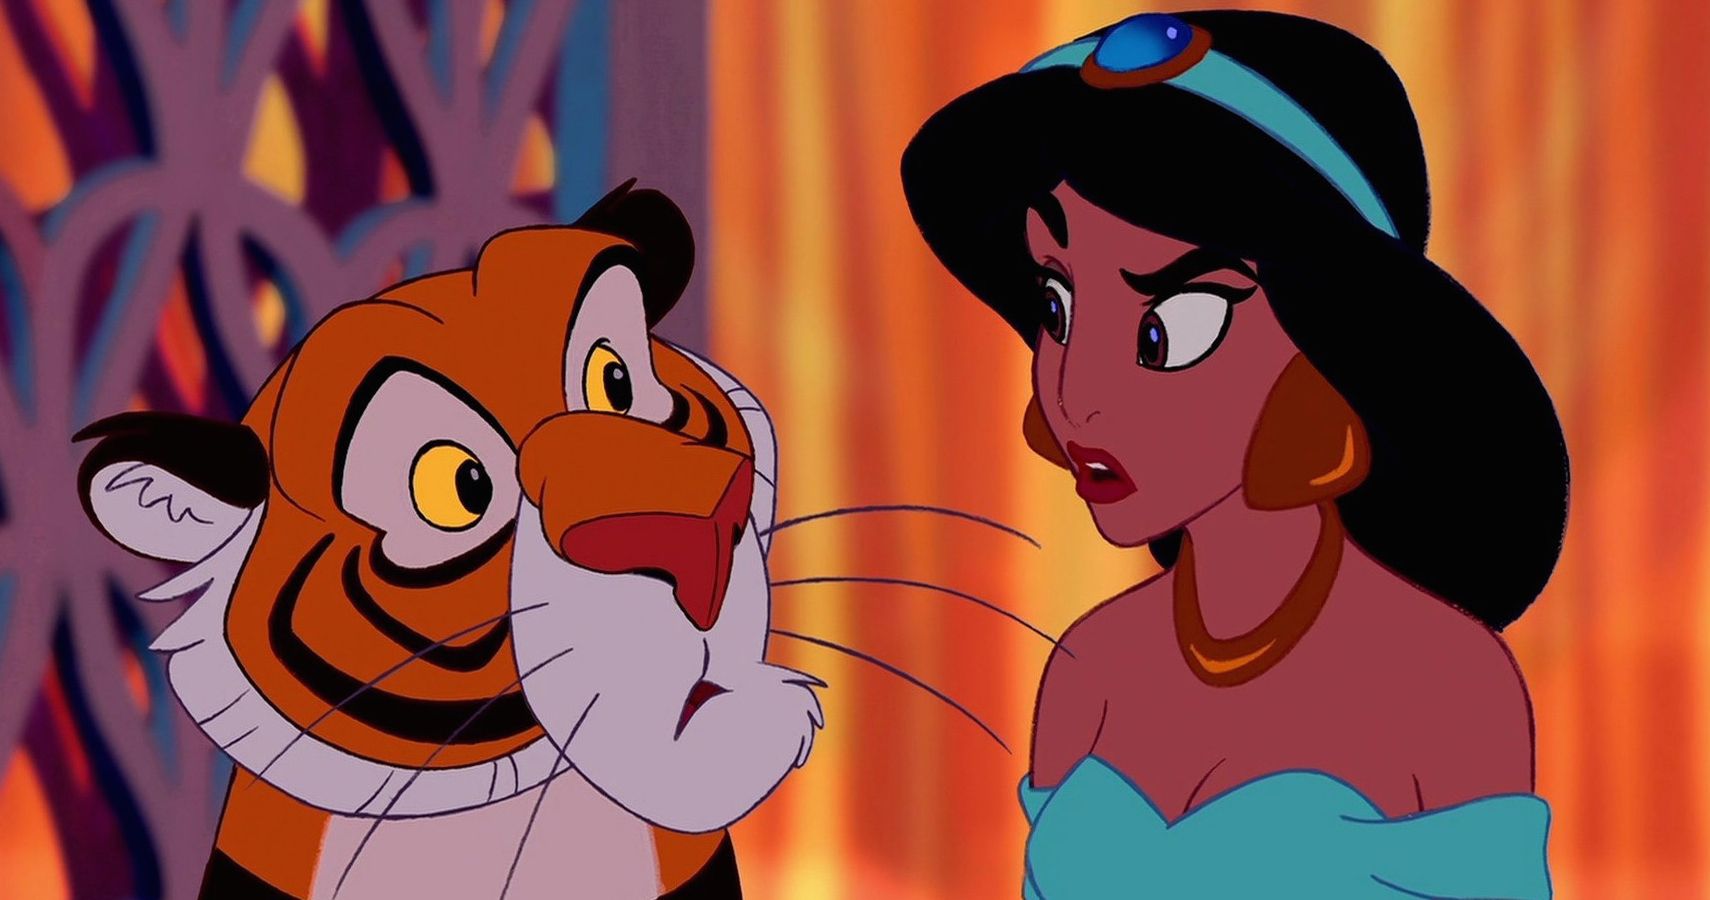 30 Disney Princesses And Heroines, Officially Ranked